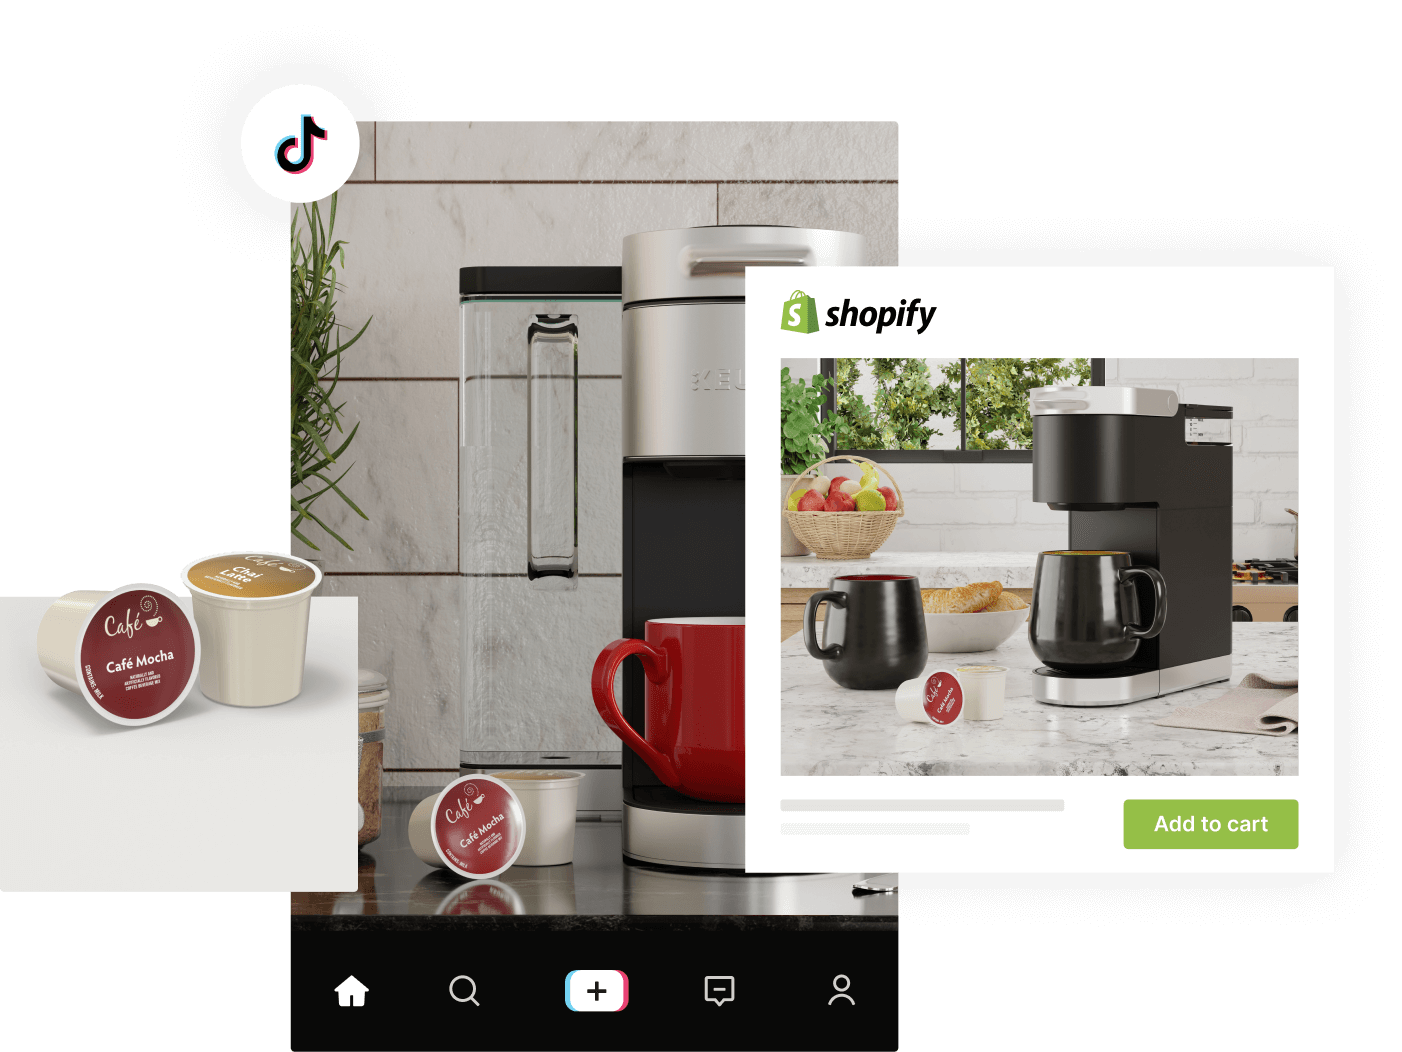 coffee pods and coffee maker product visuals in imagine.io 3D kitchen templates on tiktok and shopify